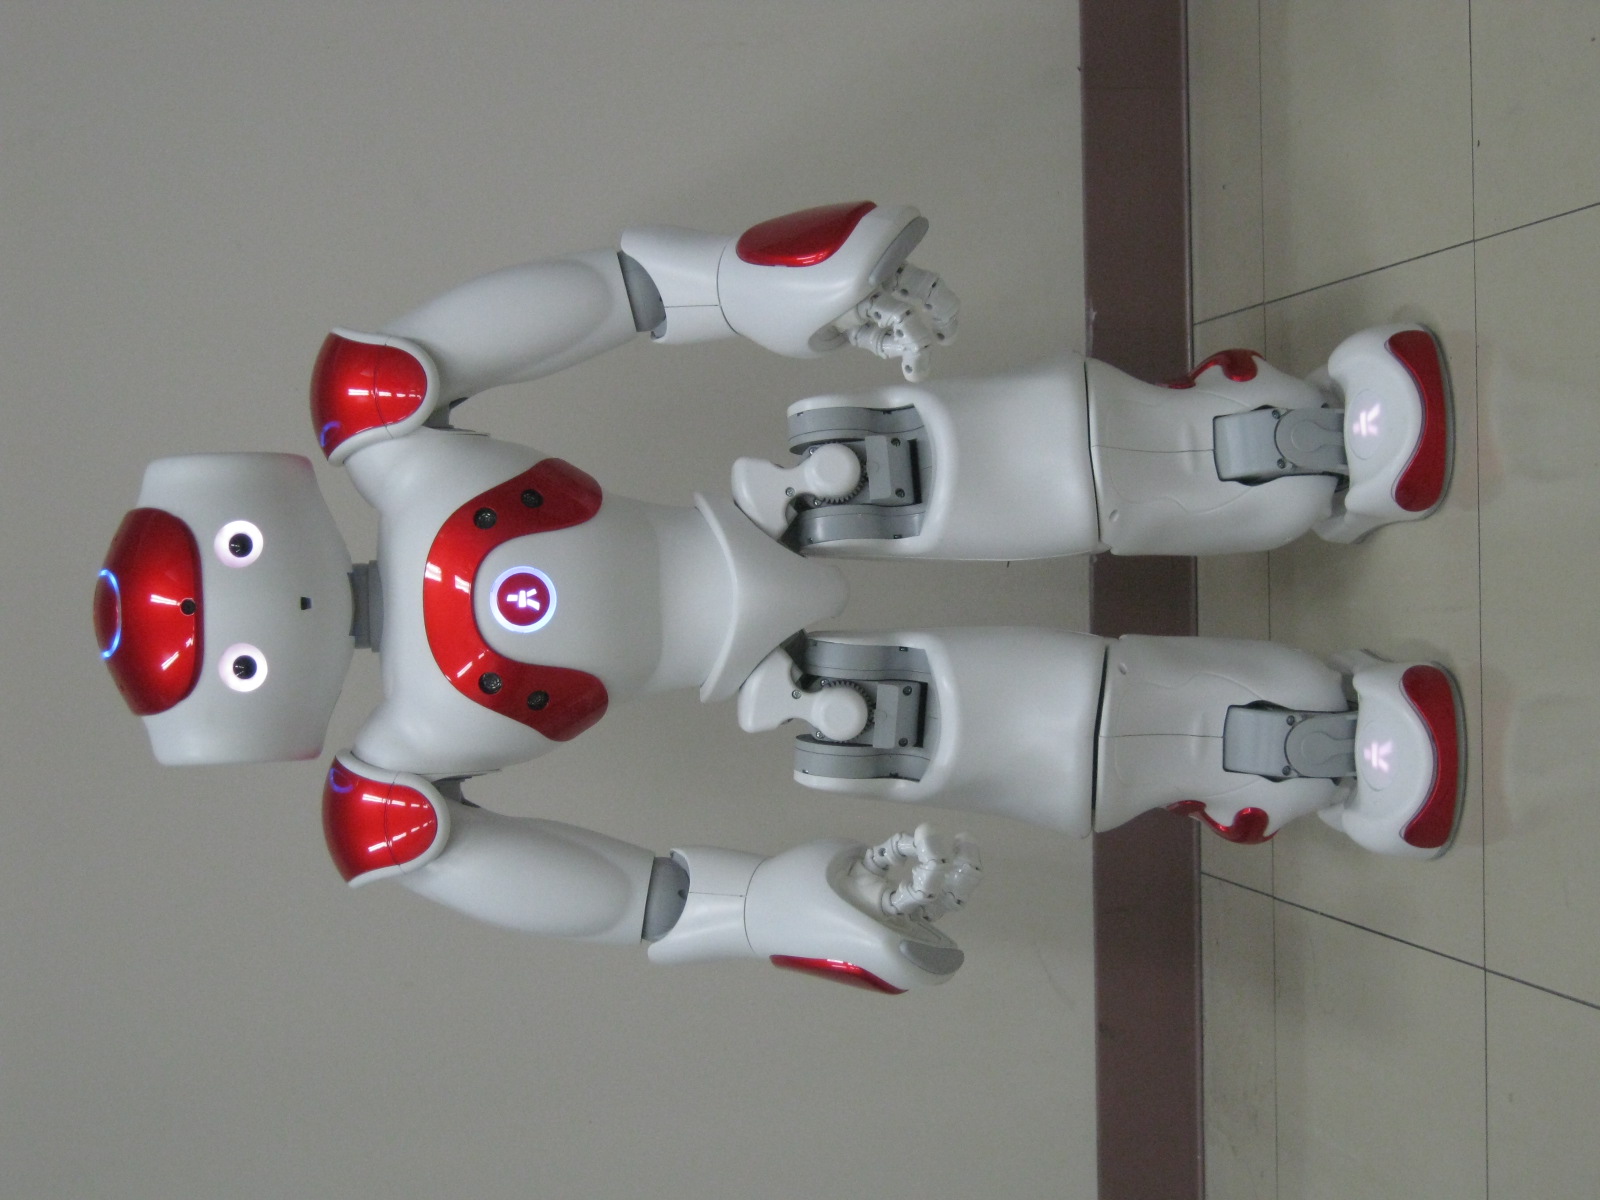 The humanoid robot used in the research